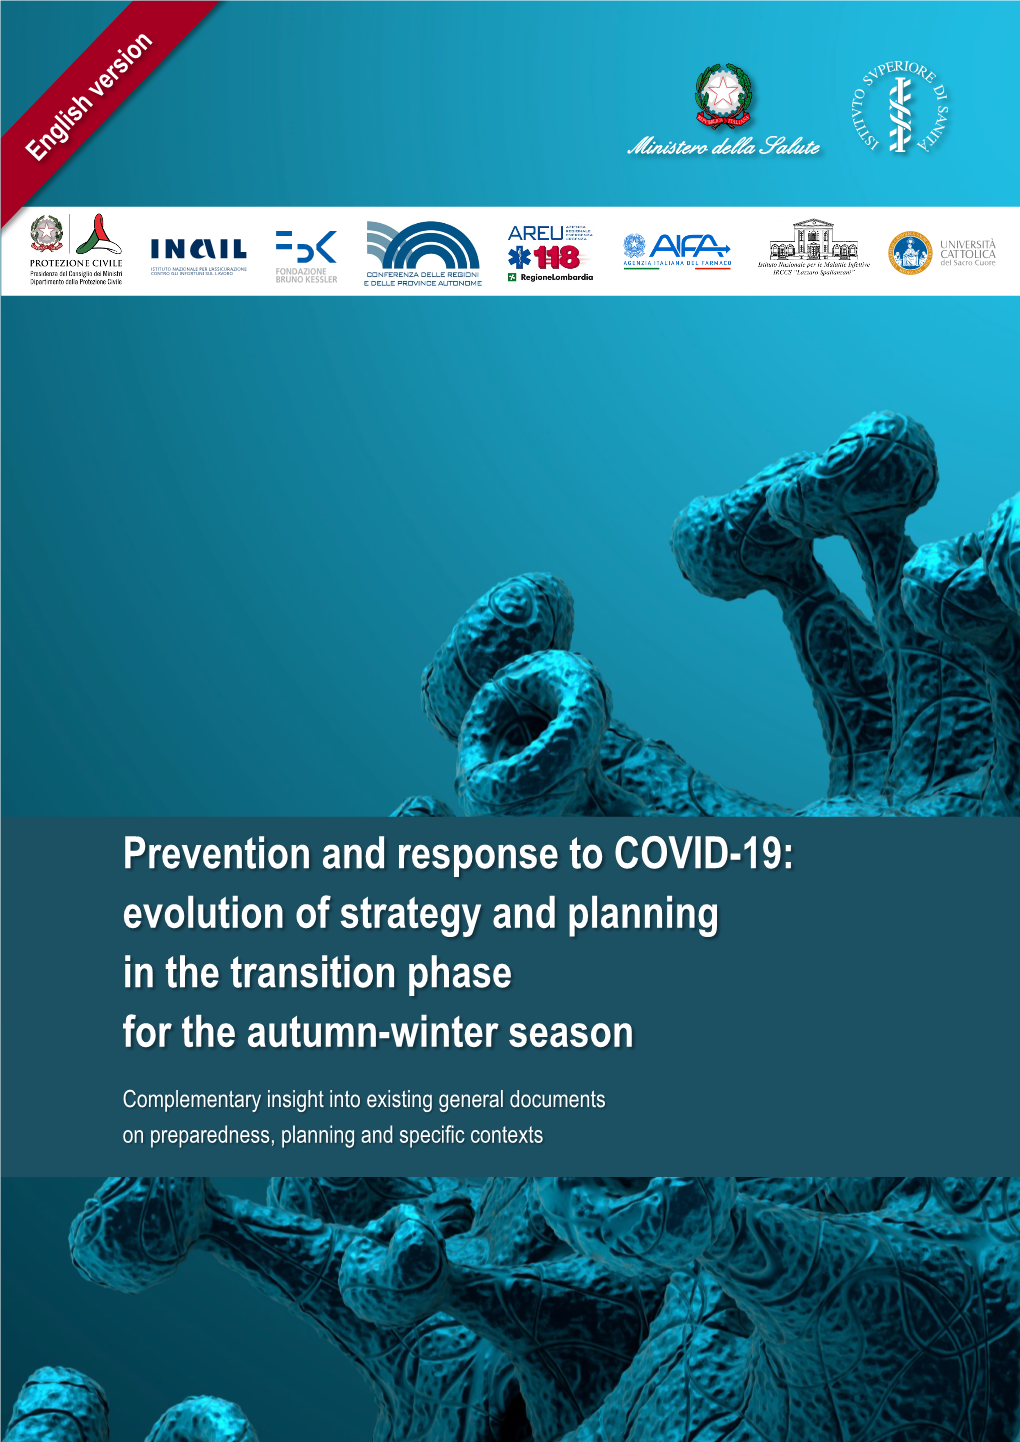 Prevention and Response to COVID-19: Evolution of Strategy and Planning in the Transition Phase for the Autumn-Winter Season